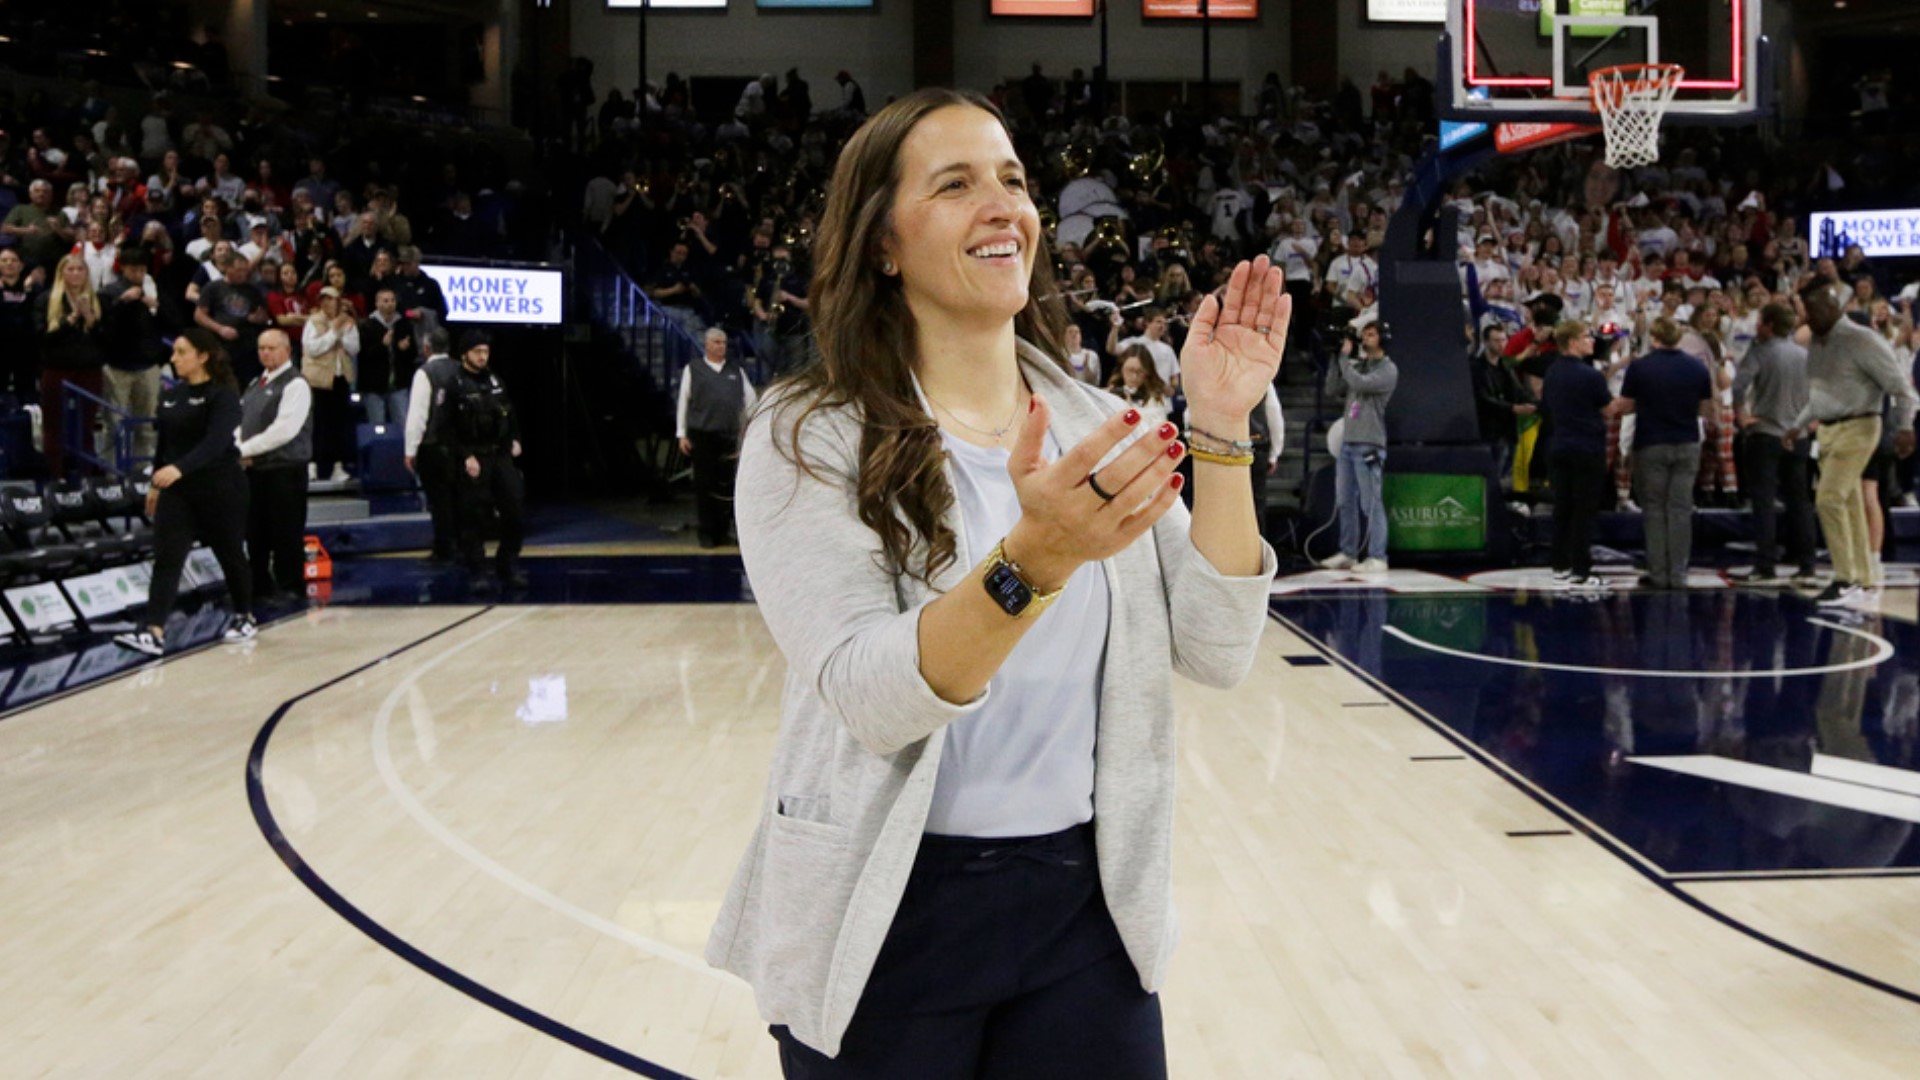 Since joining the Zags in 2014, Fortier has led the women's basketball team to a 265-63 overall record, the best winning percentage in program history at 81%.